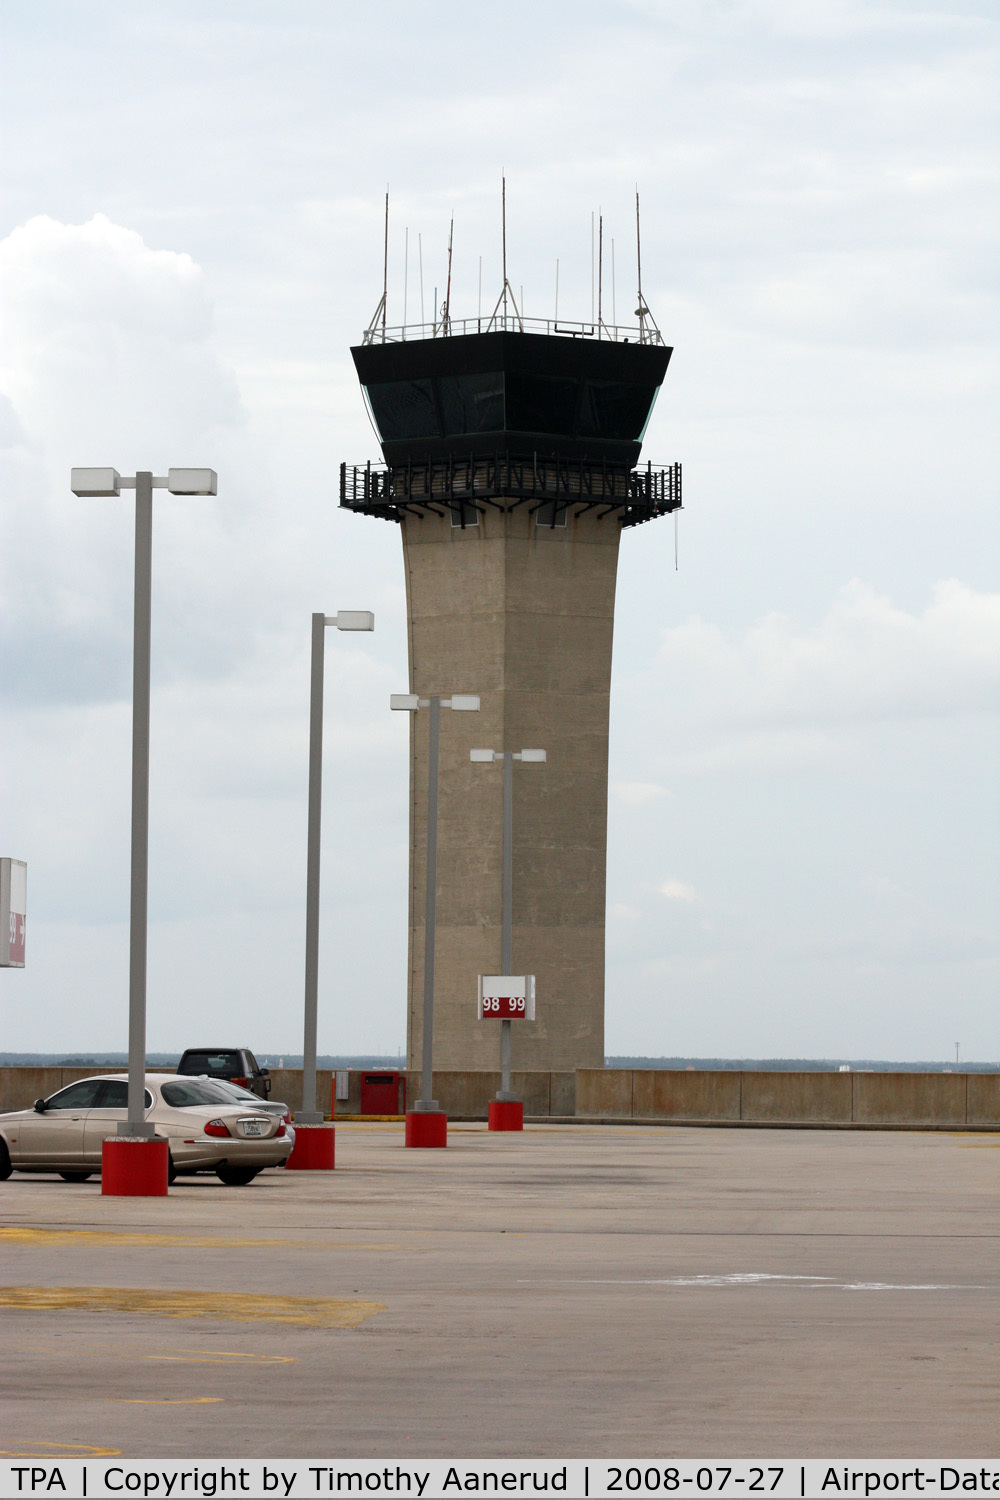 Tampa International Airport (TPA) - The control tower from the parking lots